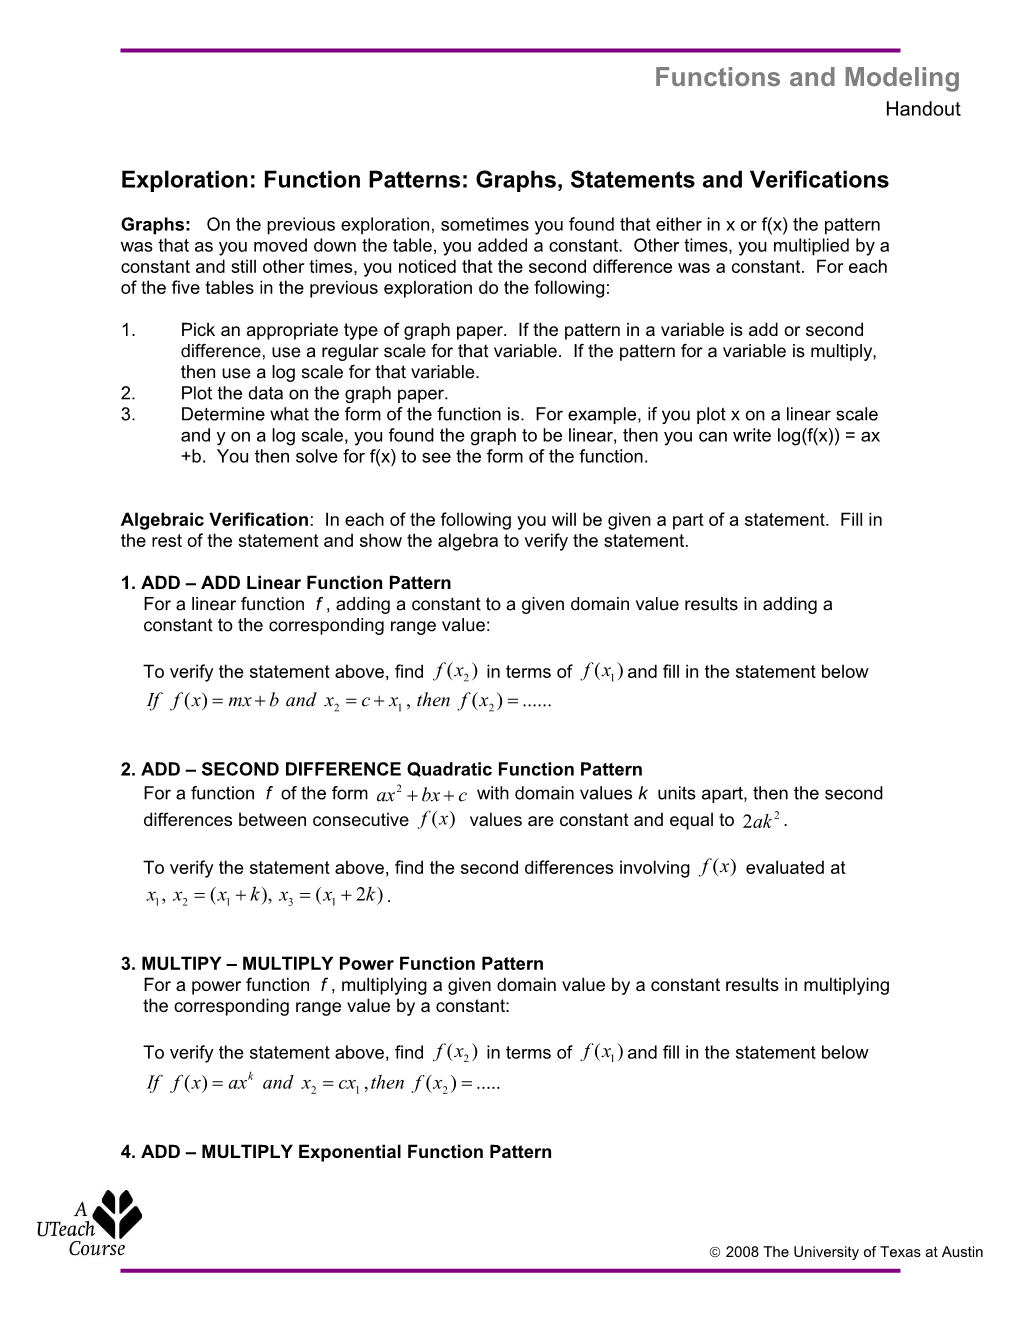 Exploration: Function Patterns: Graphs, Statements and Verifications